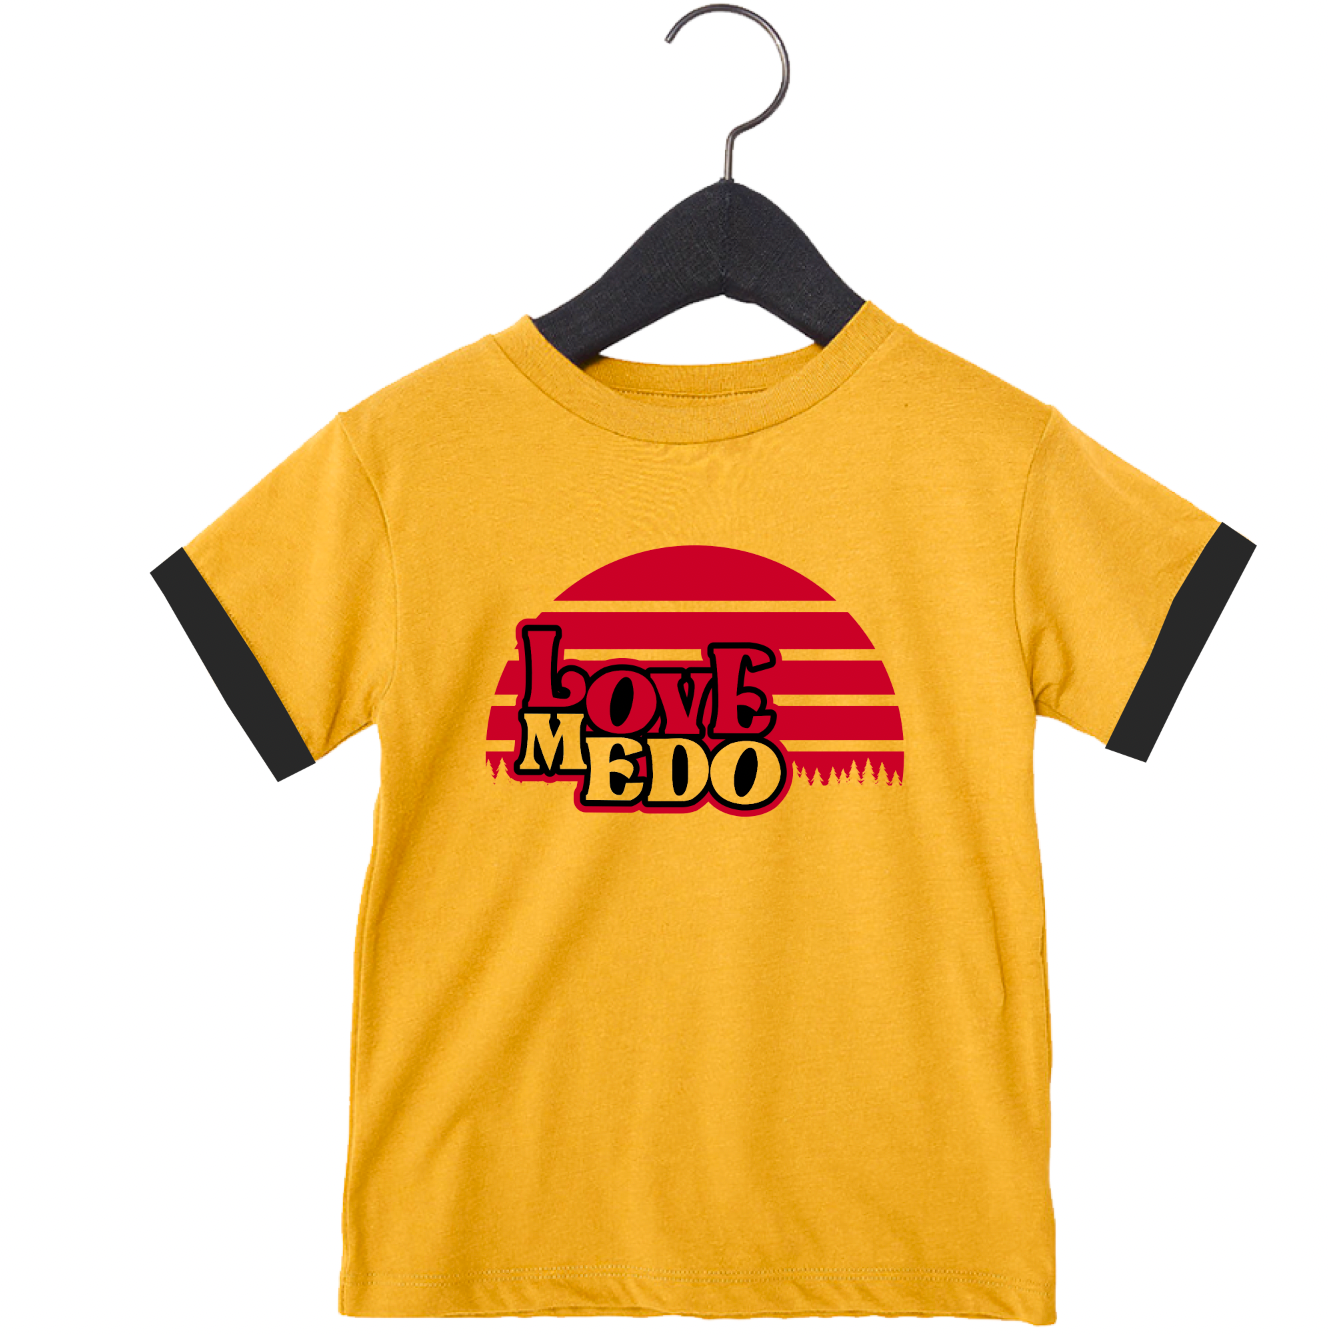 Love Me Do Yellow Tee - Unisex for Boys and Girls